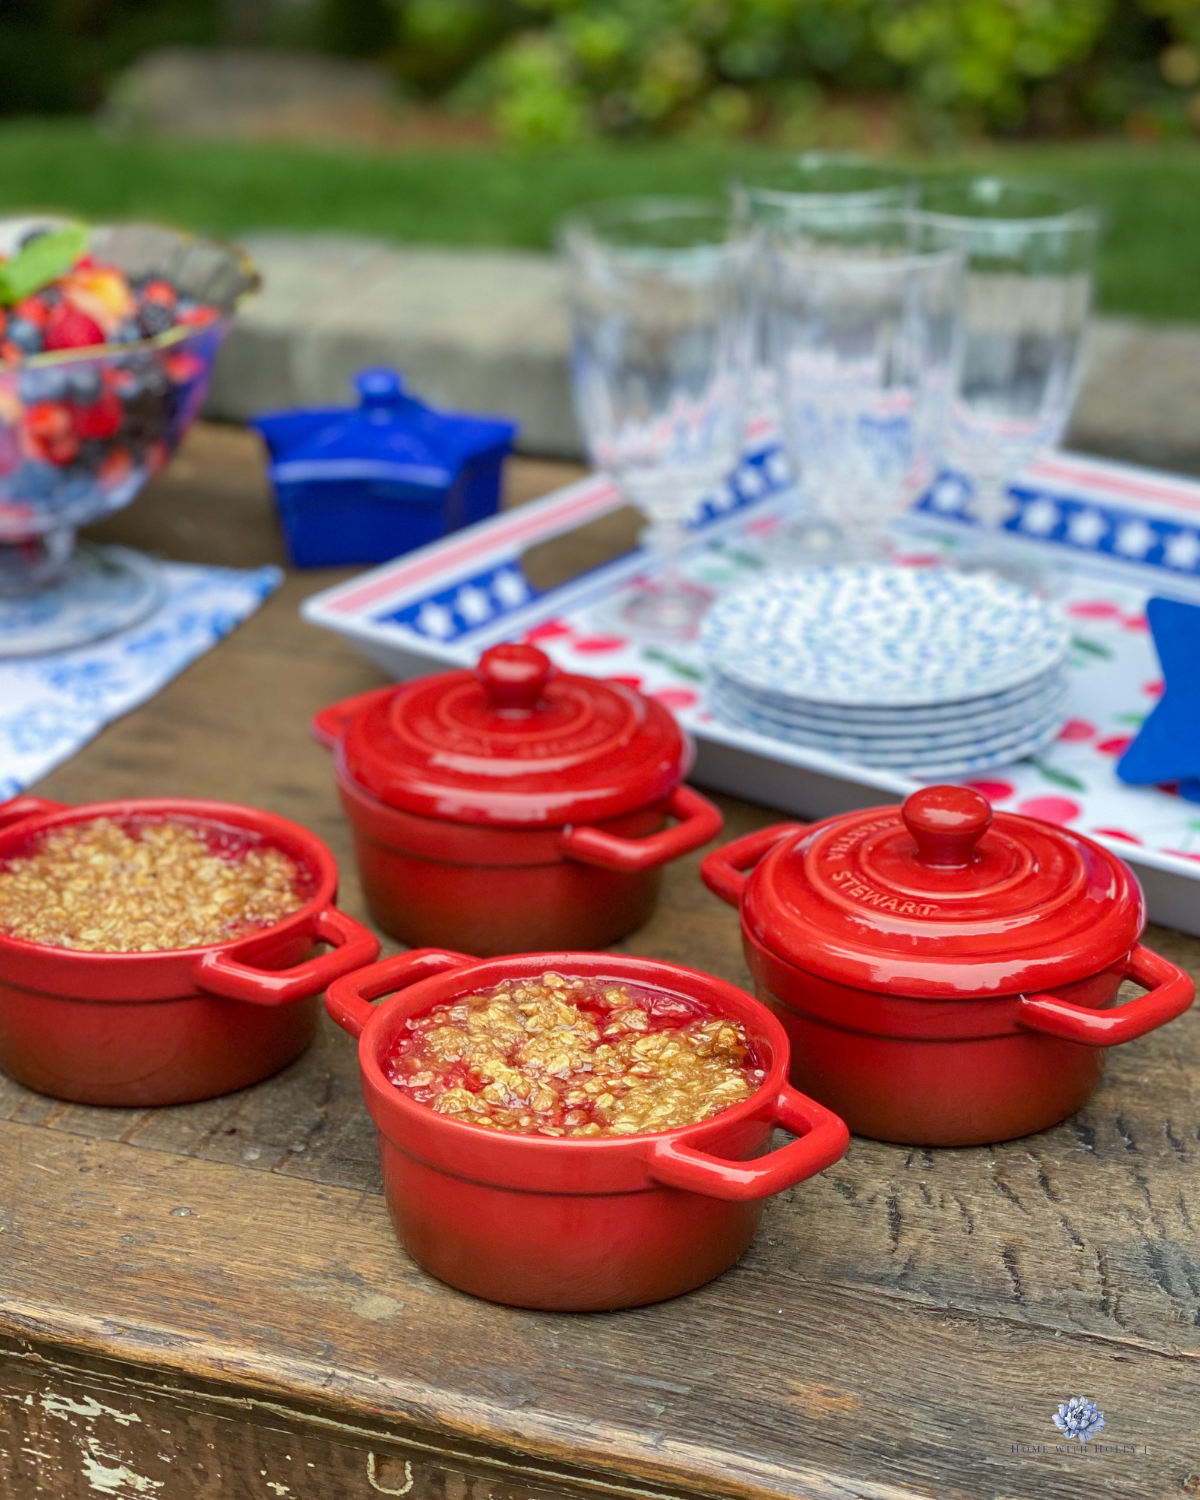 Looking for a delicious crumble dessert? Savor the sweetness of summer with this homemade cherry crisp recipe.